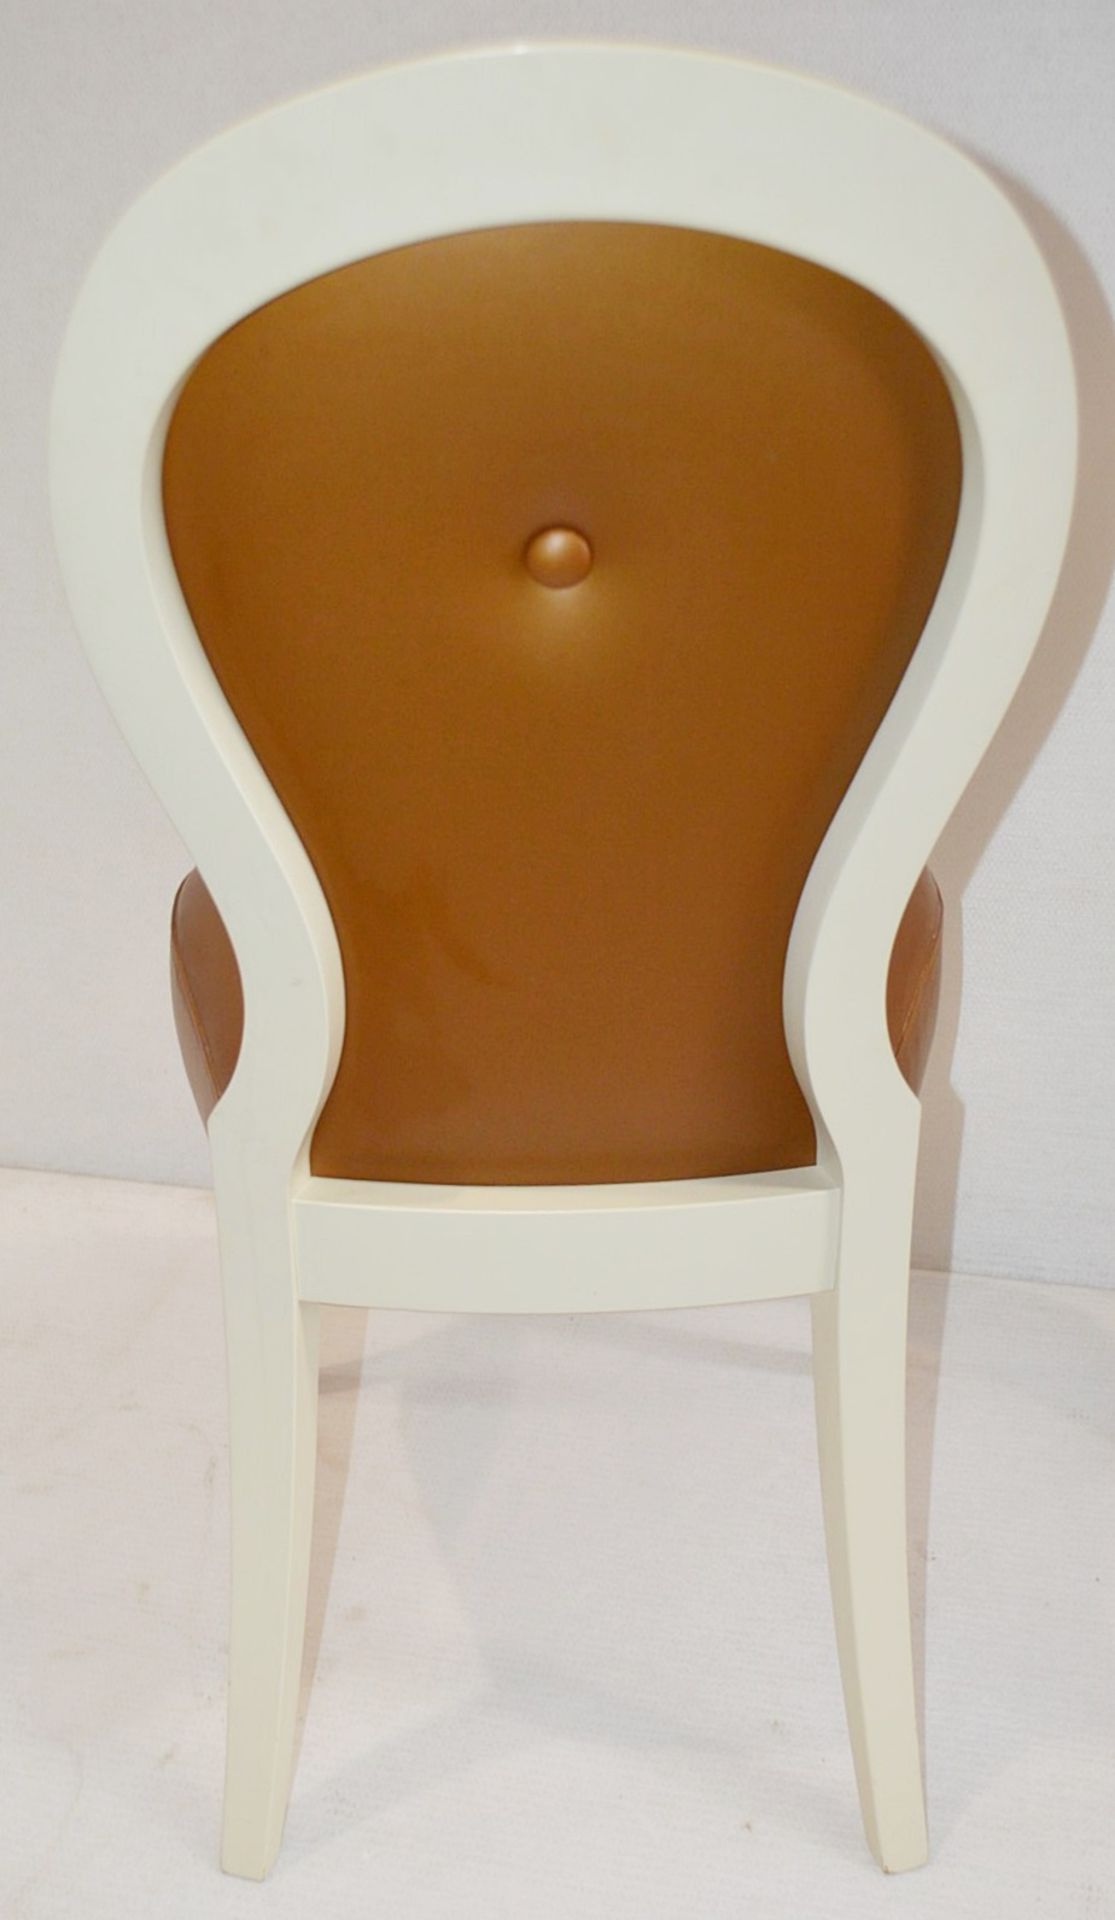 1 x Cushion Backed Chair With Curved Legs - Dimensions: H100 x W49 x D50cm / Seat 48cm - Ref: HMS128 - Image 3 of 4